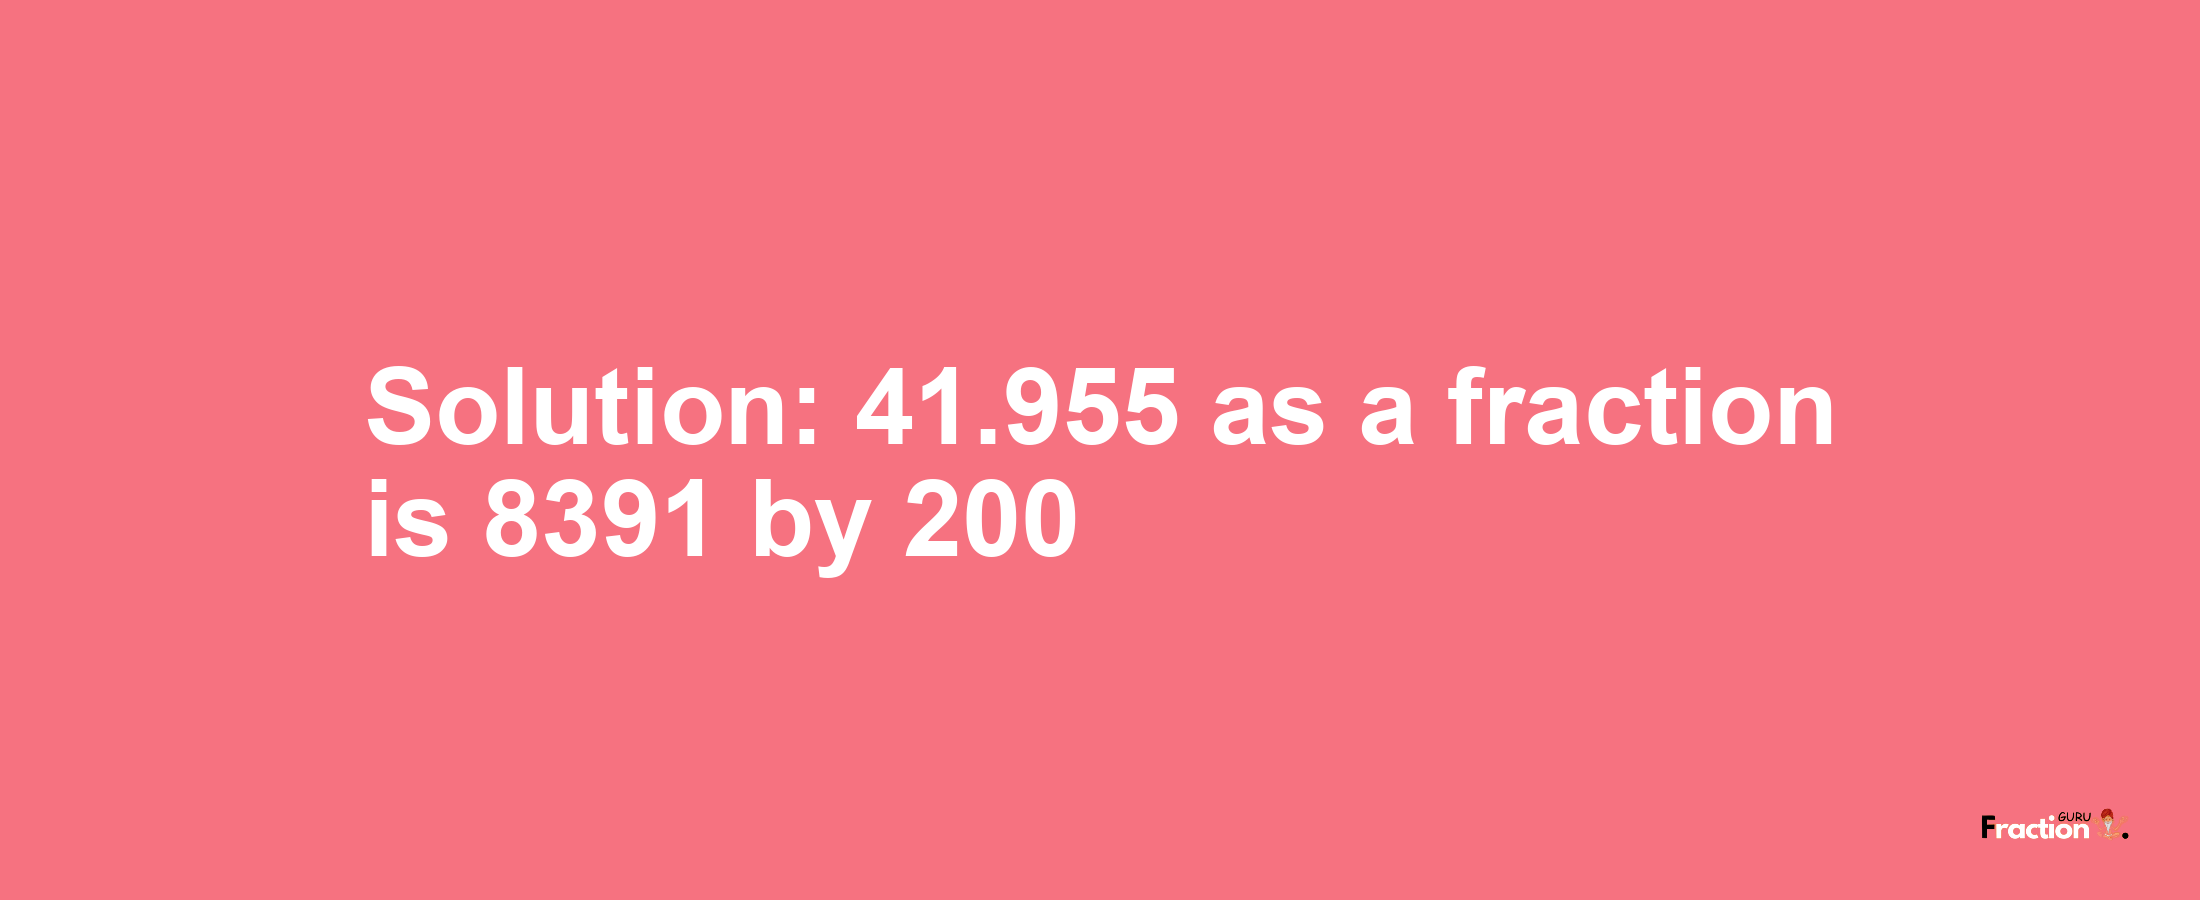 Solution:41.955 as a fraction is 8391/200